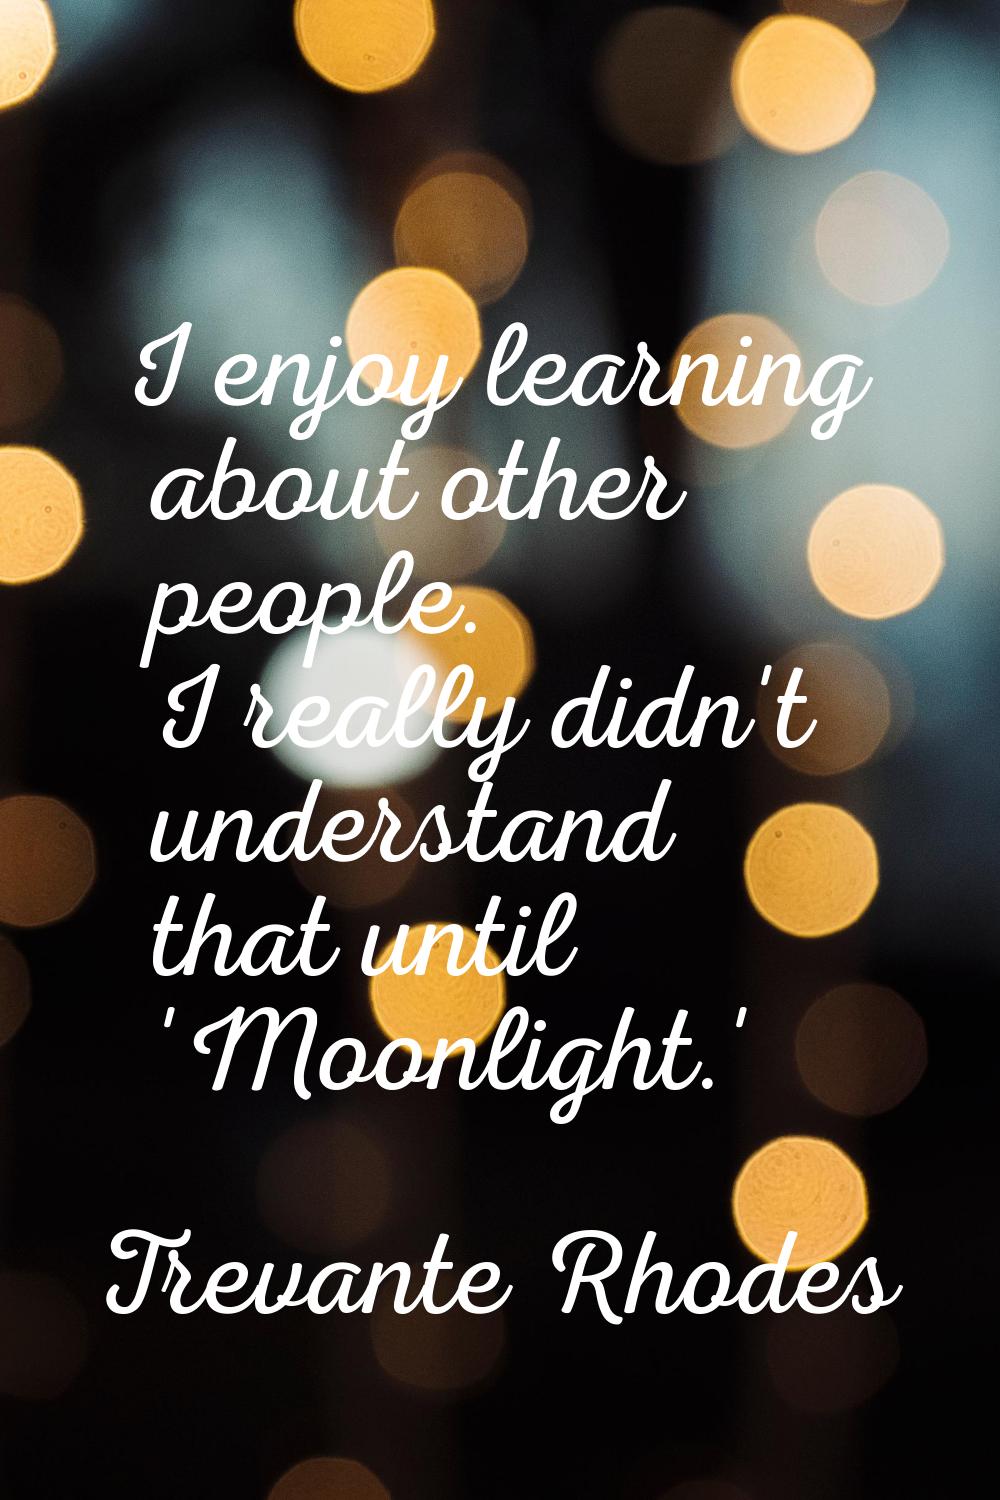 I enjoy learning about other people. I really didn't understand that until 'Moonlight.'